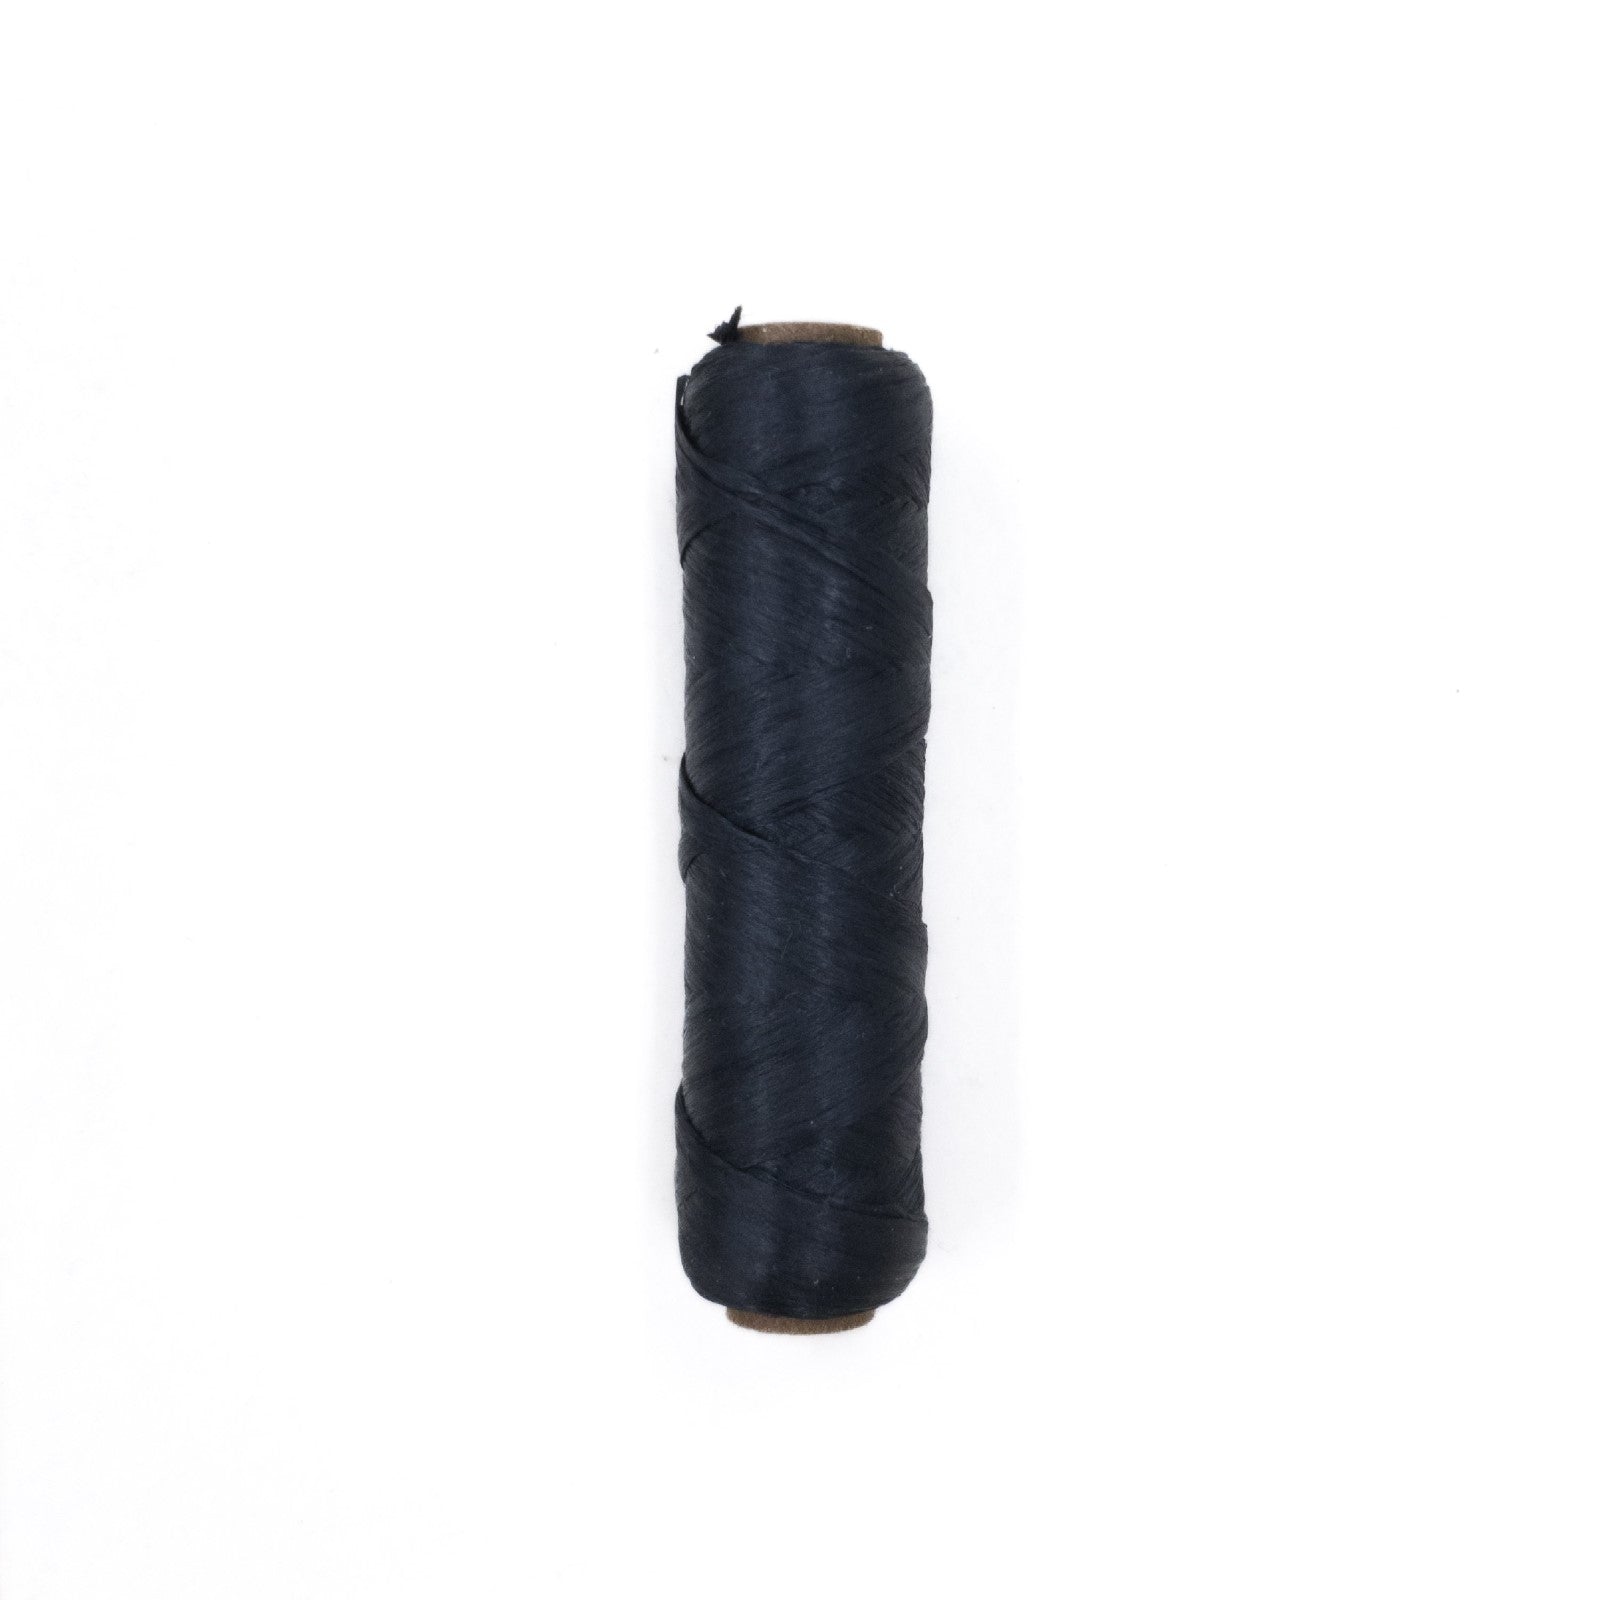 Sinew Artificial Thread 20 and 130 yards - Various Colors, Black / 20yd | The Leather Guy